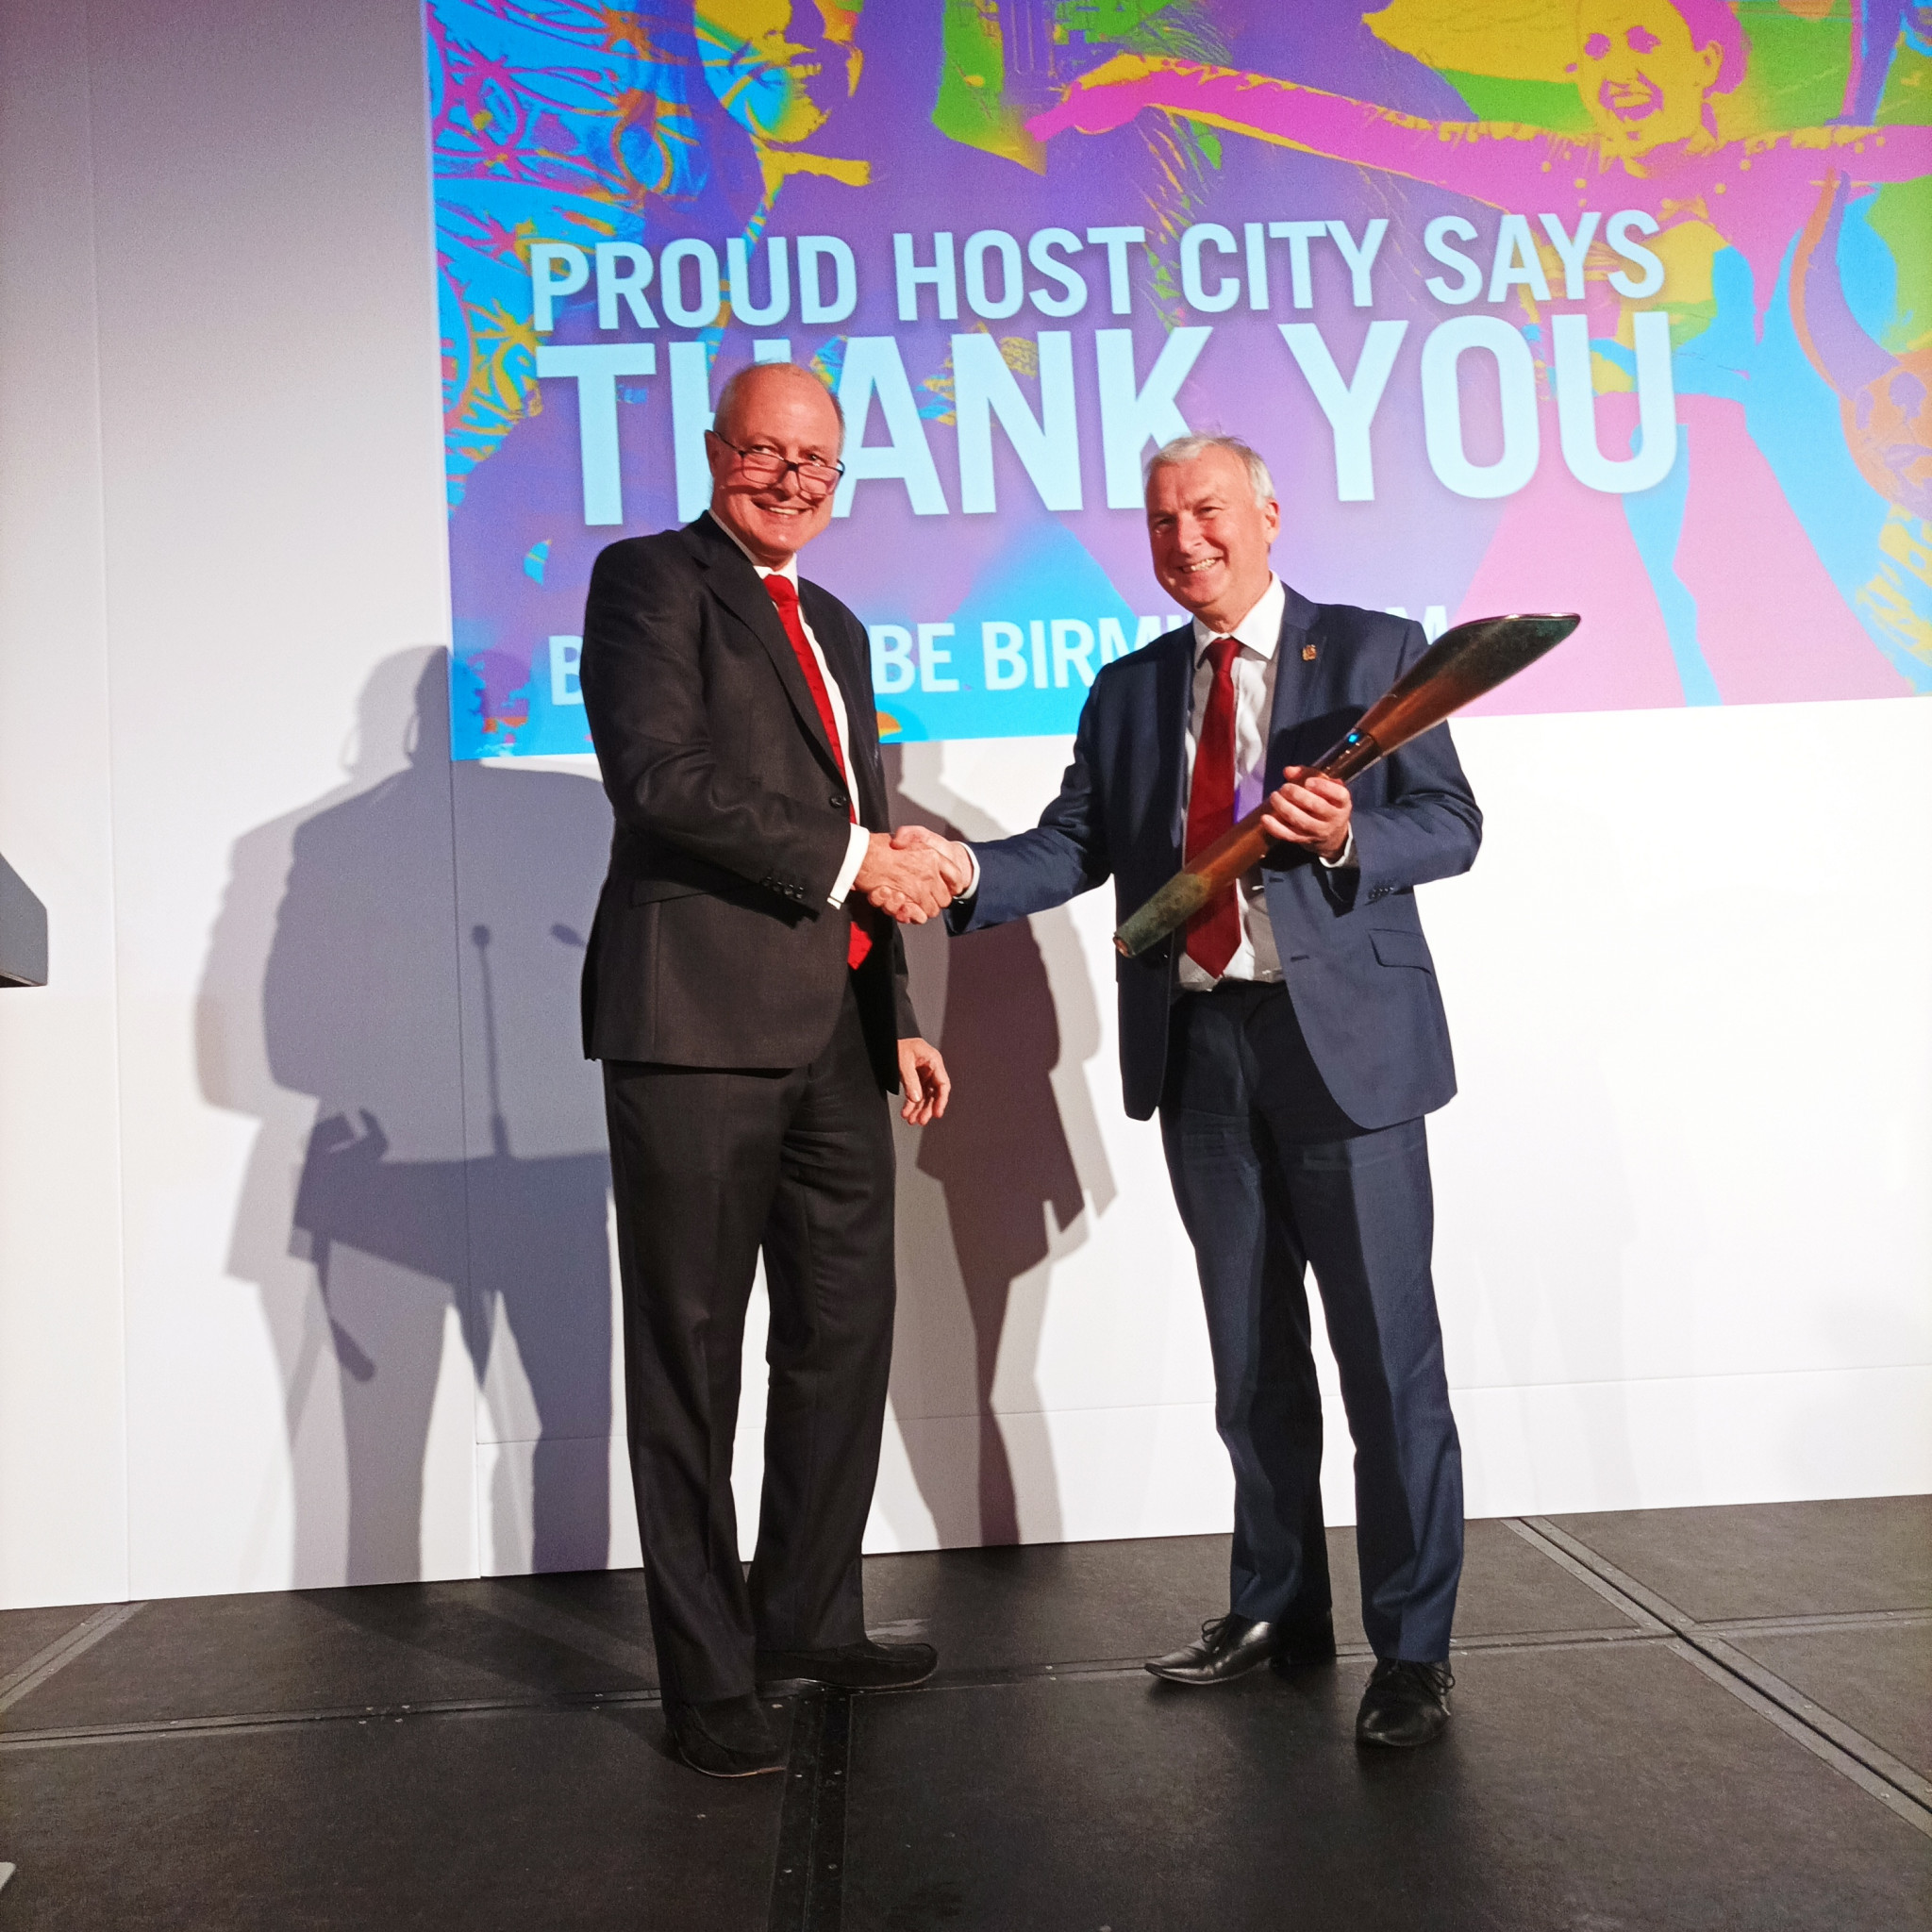 Council leader Ward hails role of citizens in Birmingham 2022 success